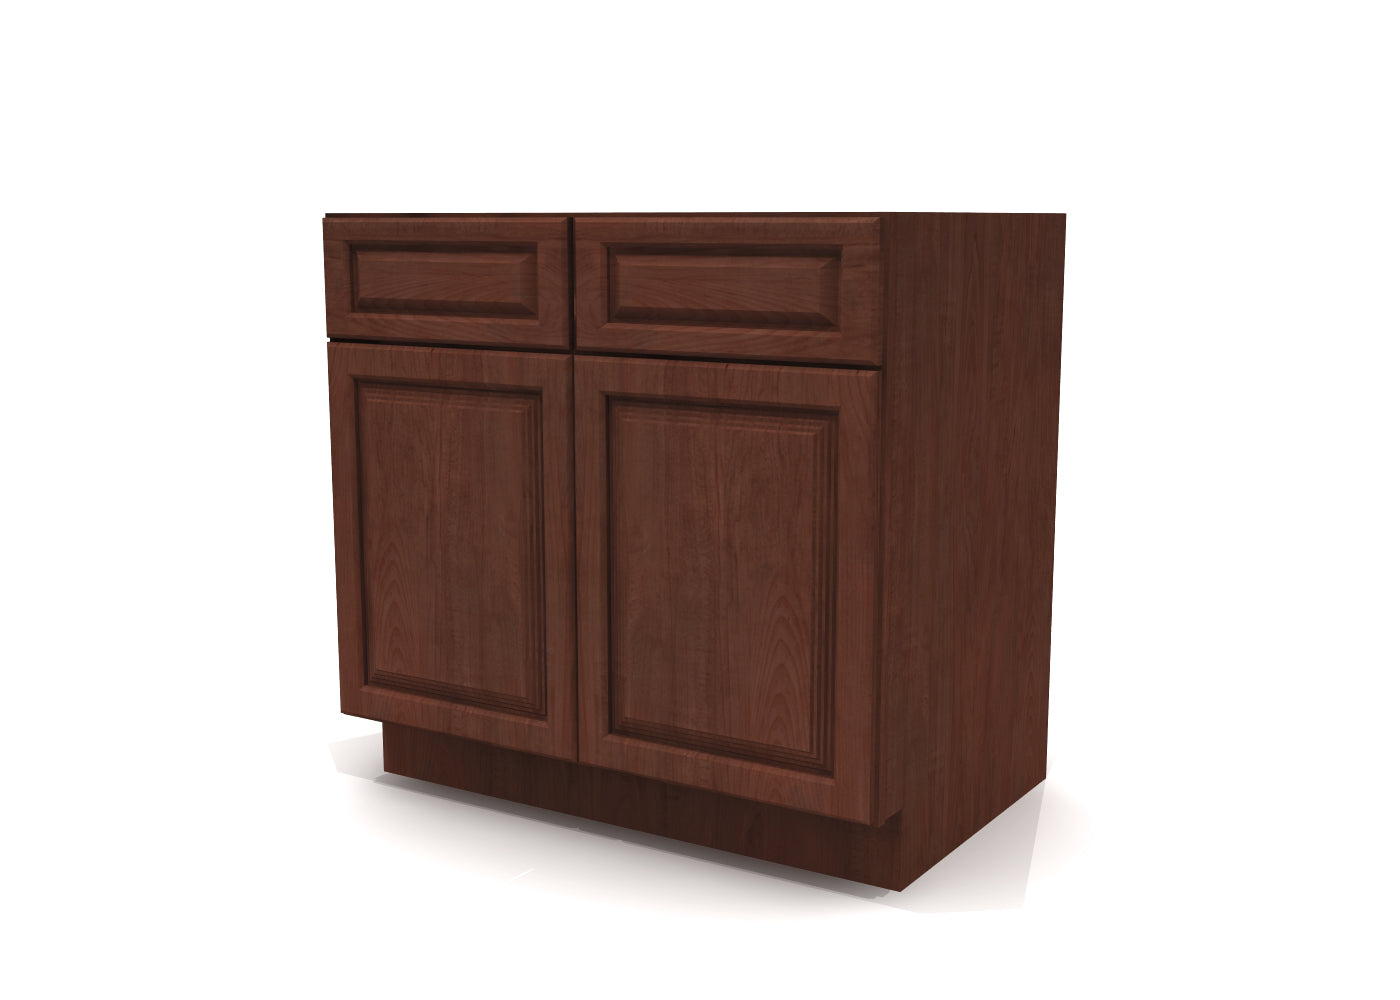 Base Double Door Two Drawers 36" Wide Cherry Raised Panel Cabinet